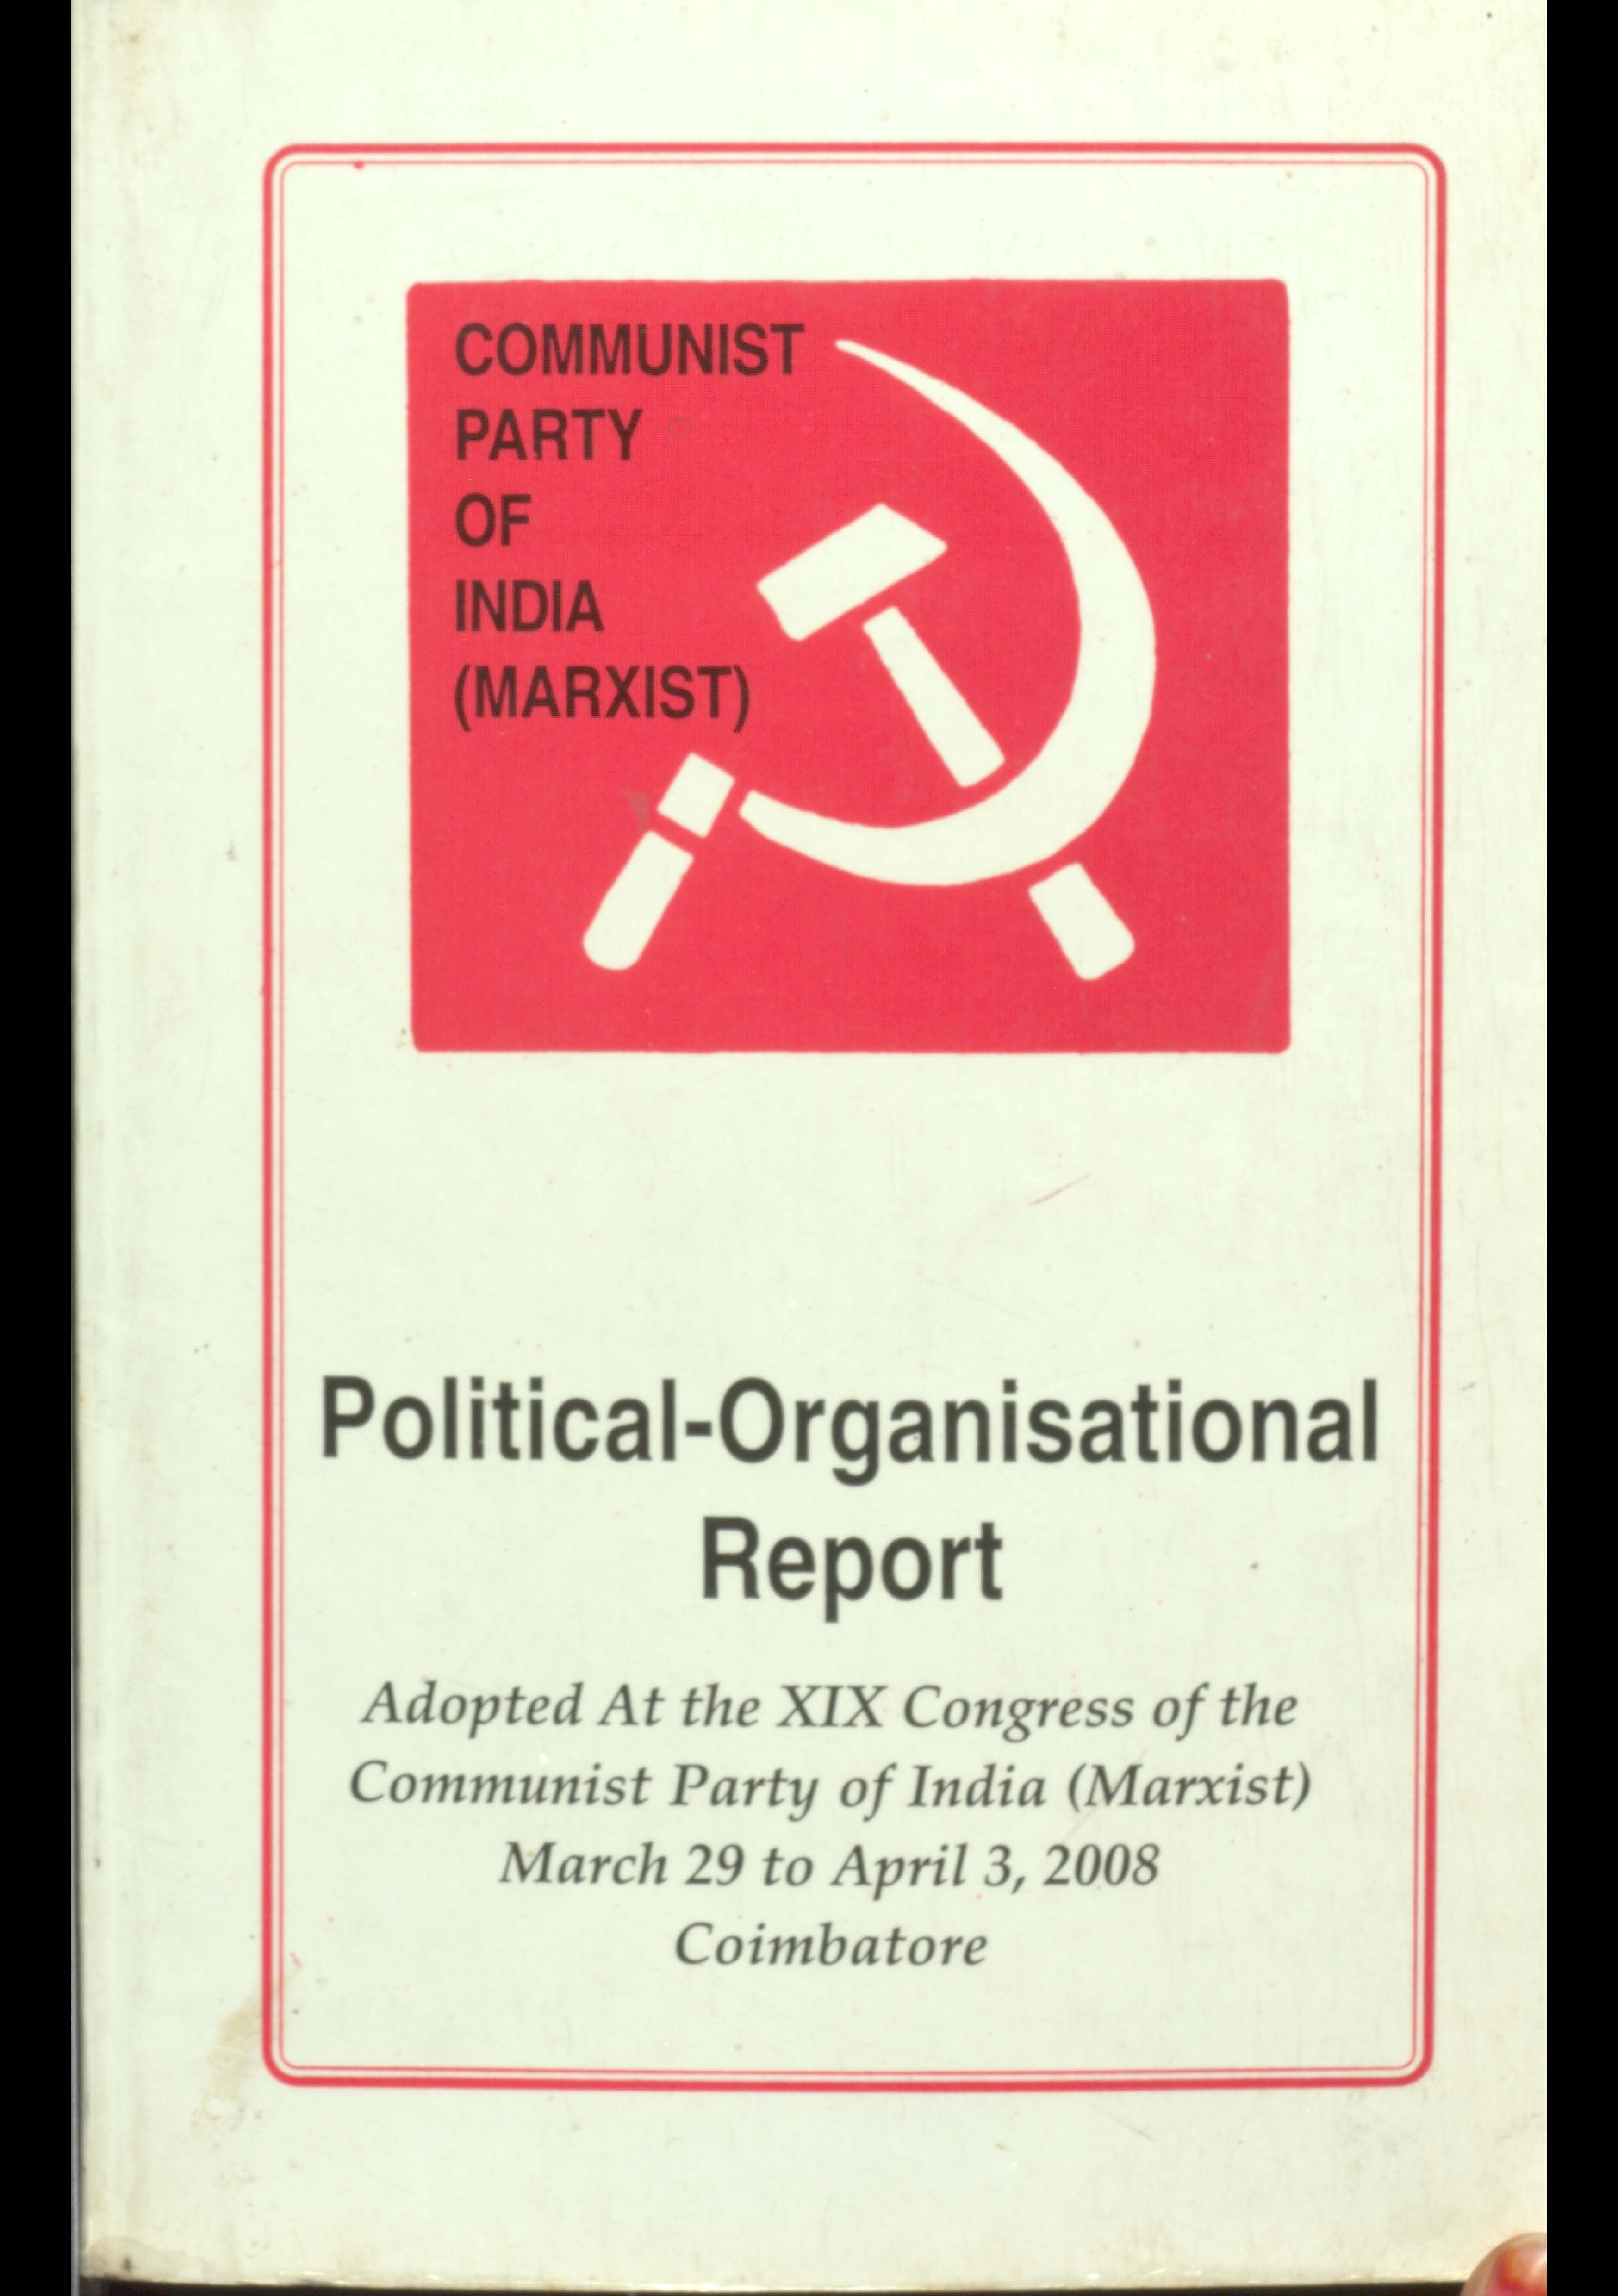 Political-organisational report (march 29 to april 3, 2008)